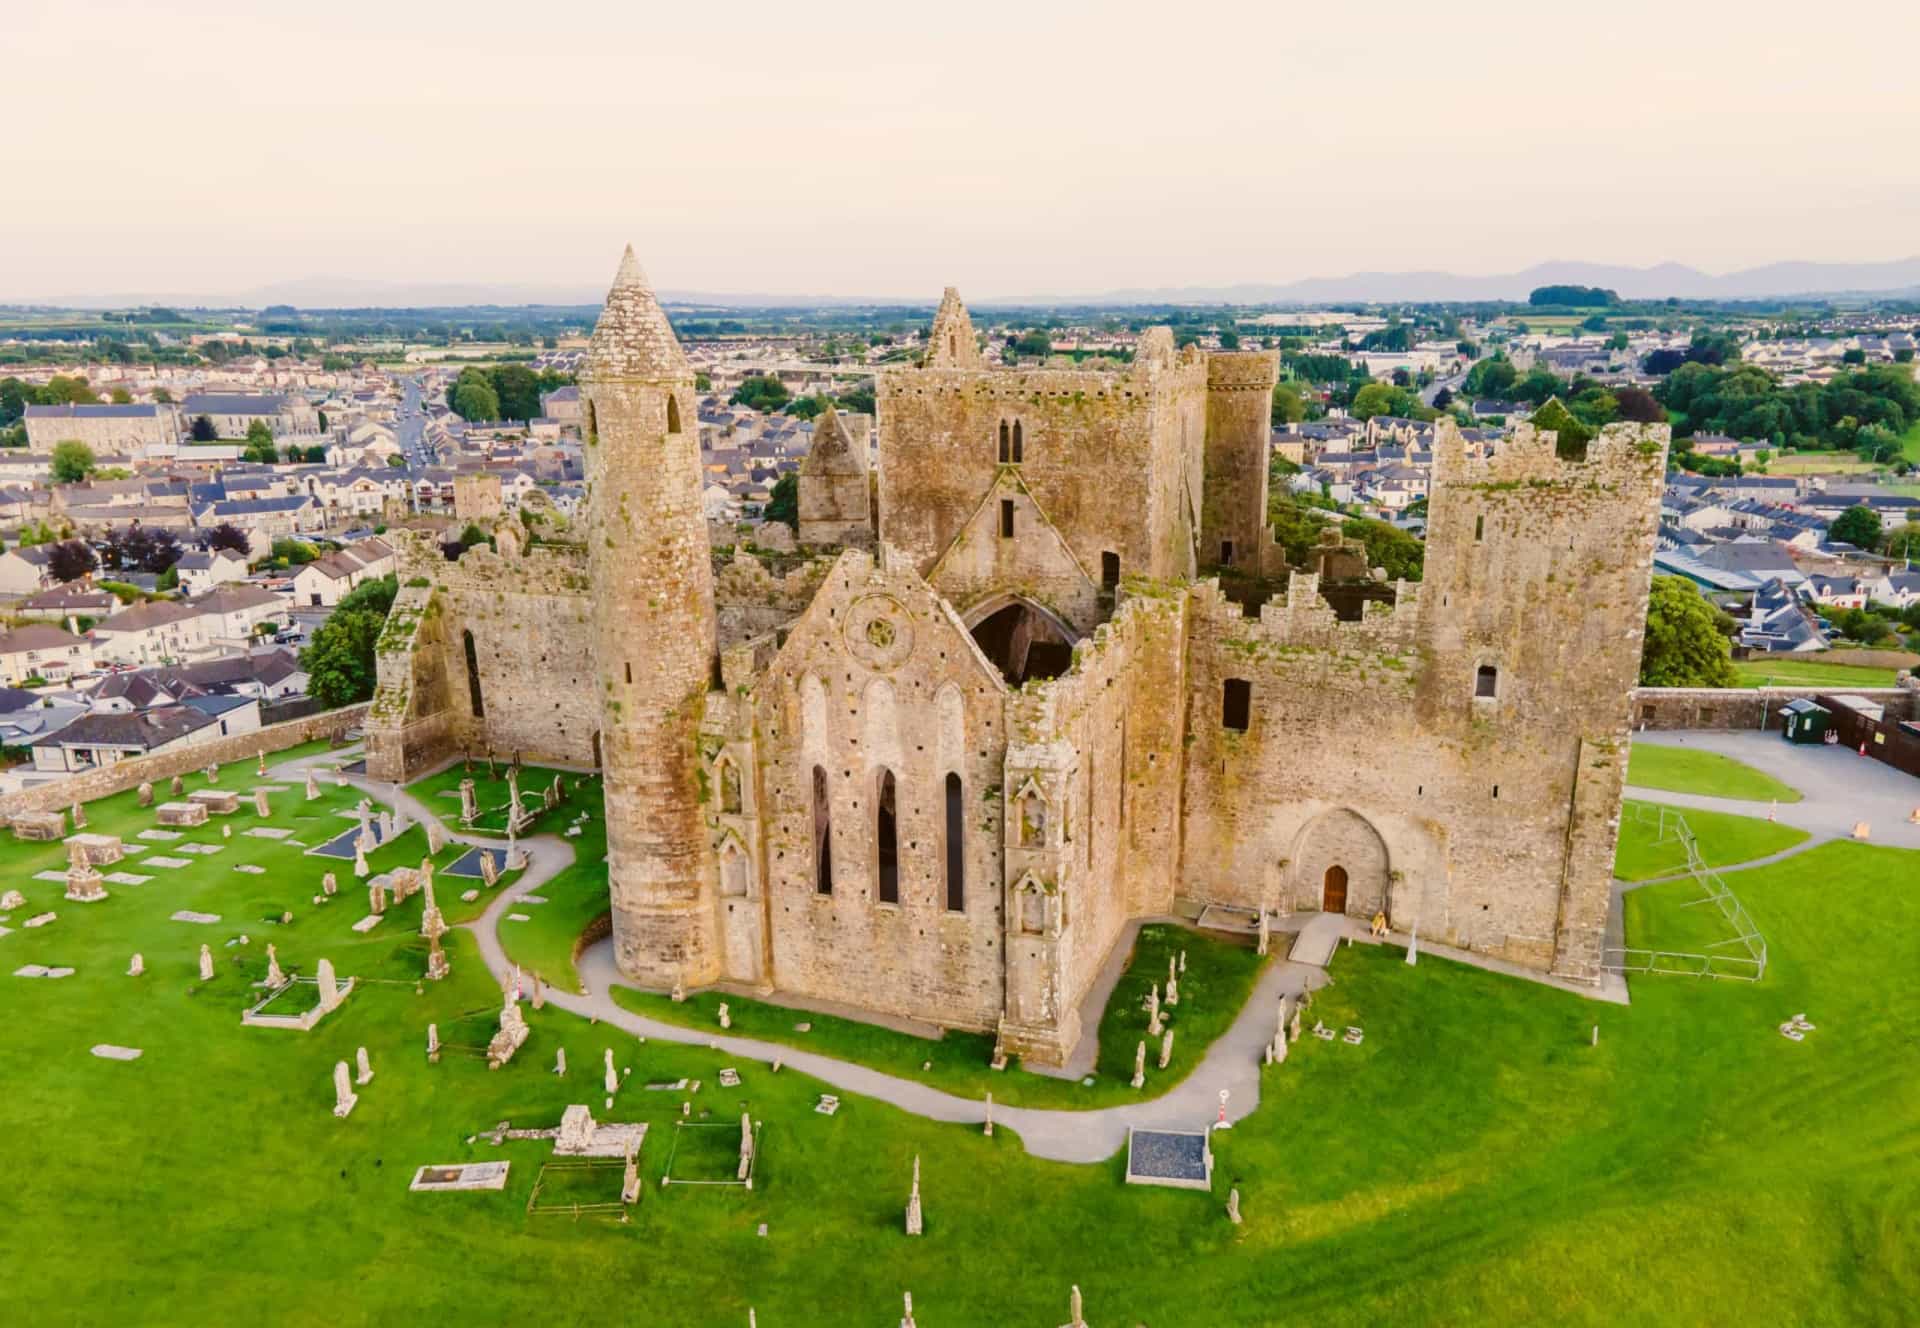 <p>The Cashel skyline is dominated by the Rock of Cashel, a 12th-century site comprising the ruins of a cathedral, chapel, and a well-preserved round tower, the oldest and tallest structure in the historic complex and dating back to 1100.</p>